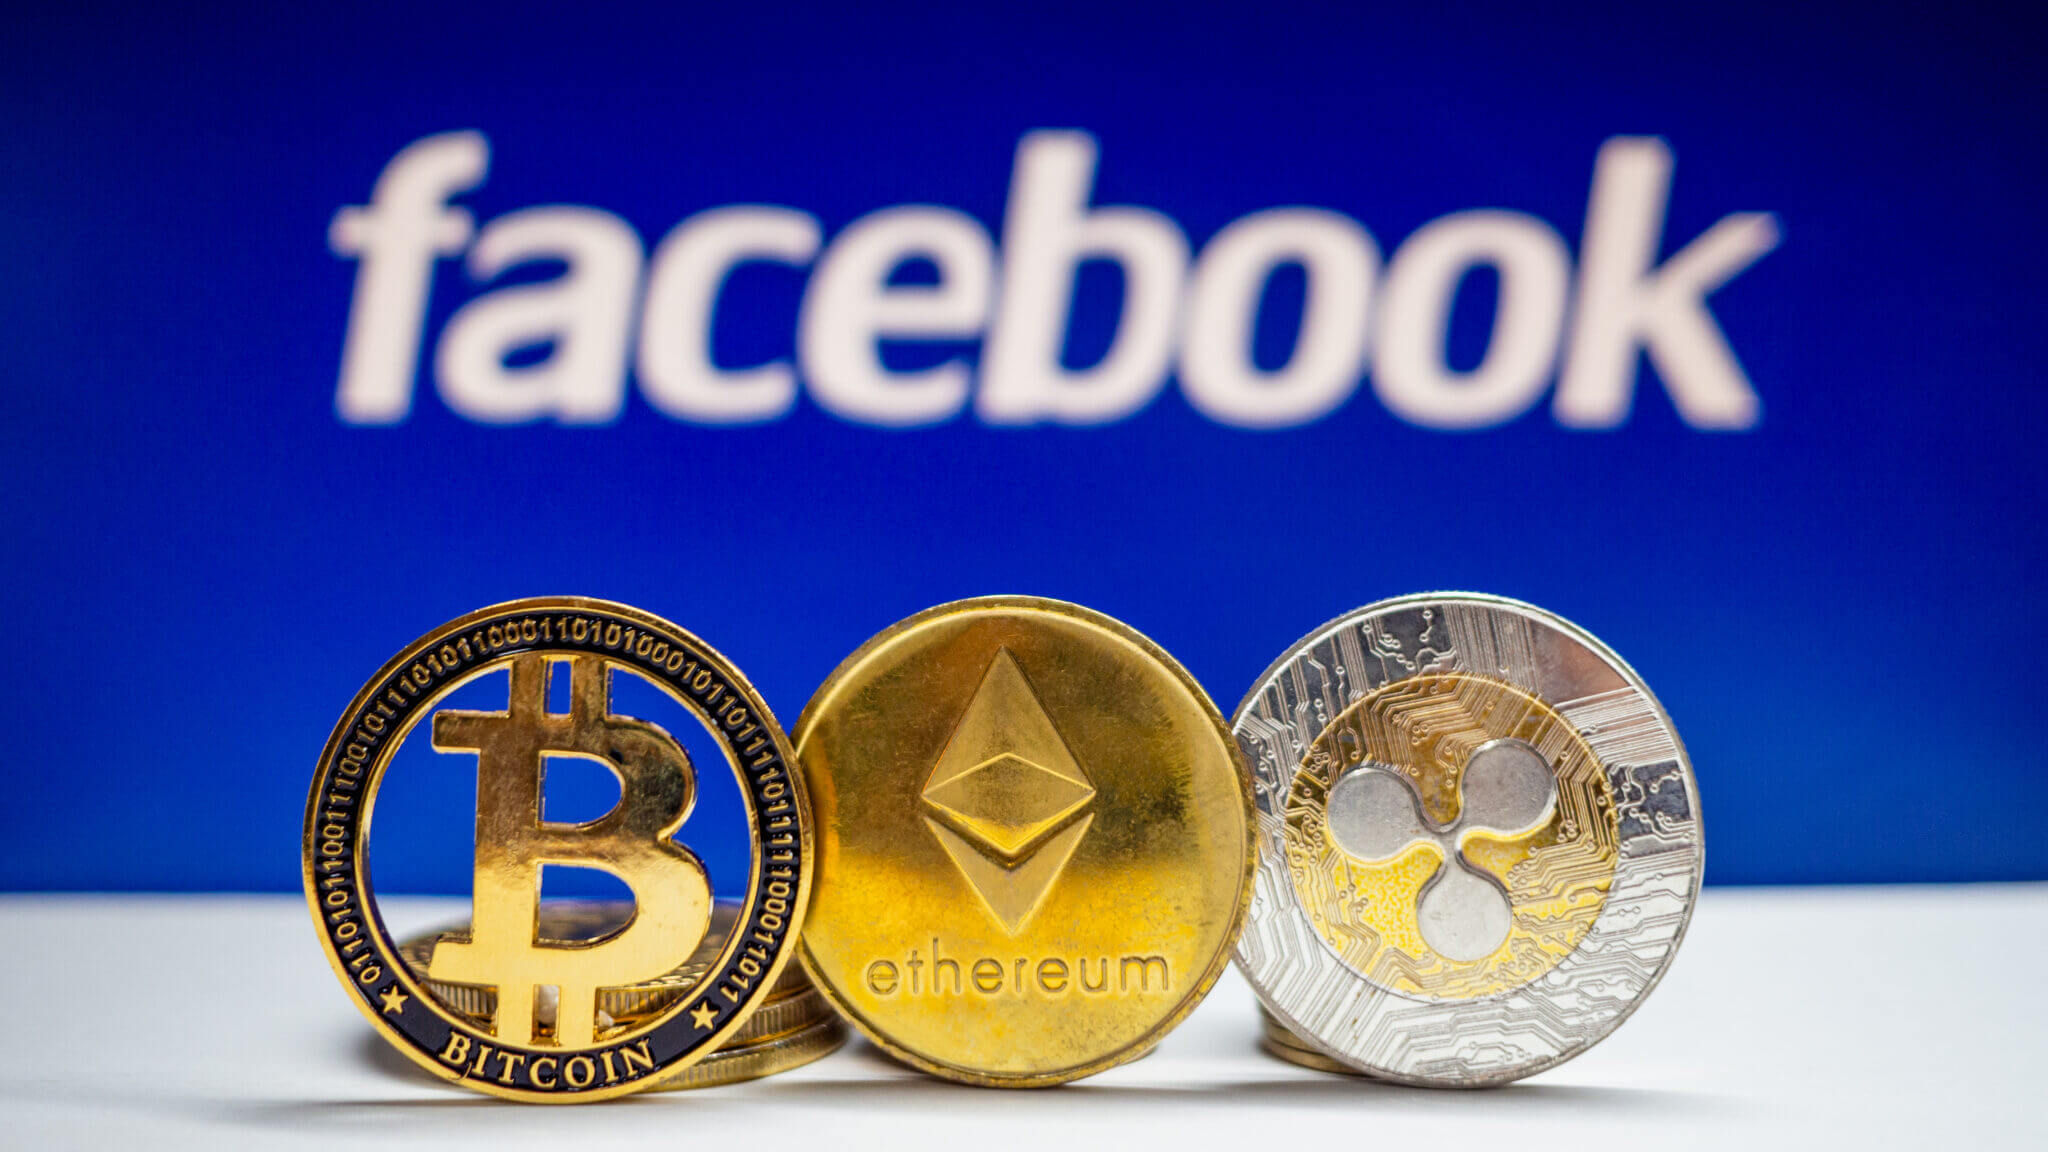 crypto tokens in front of the facebook logo